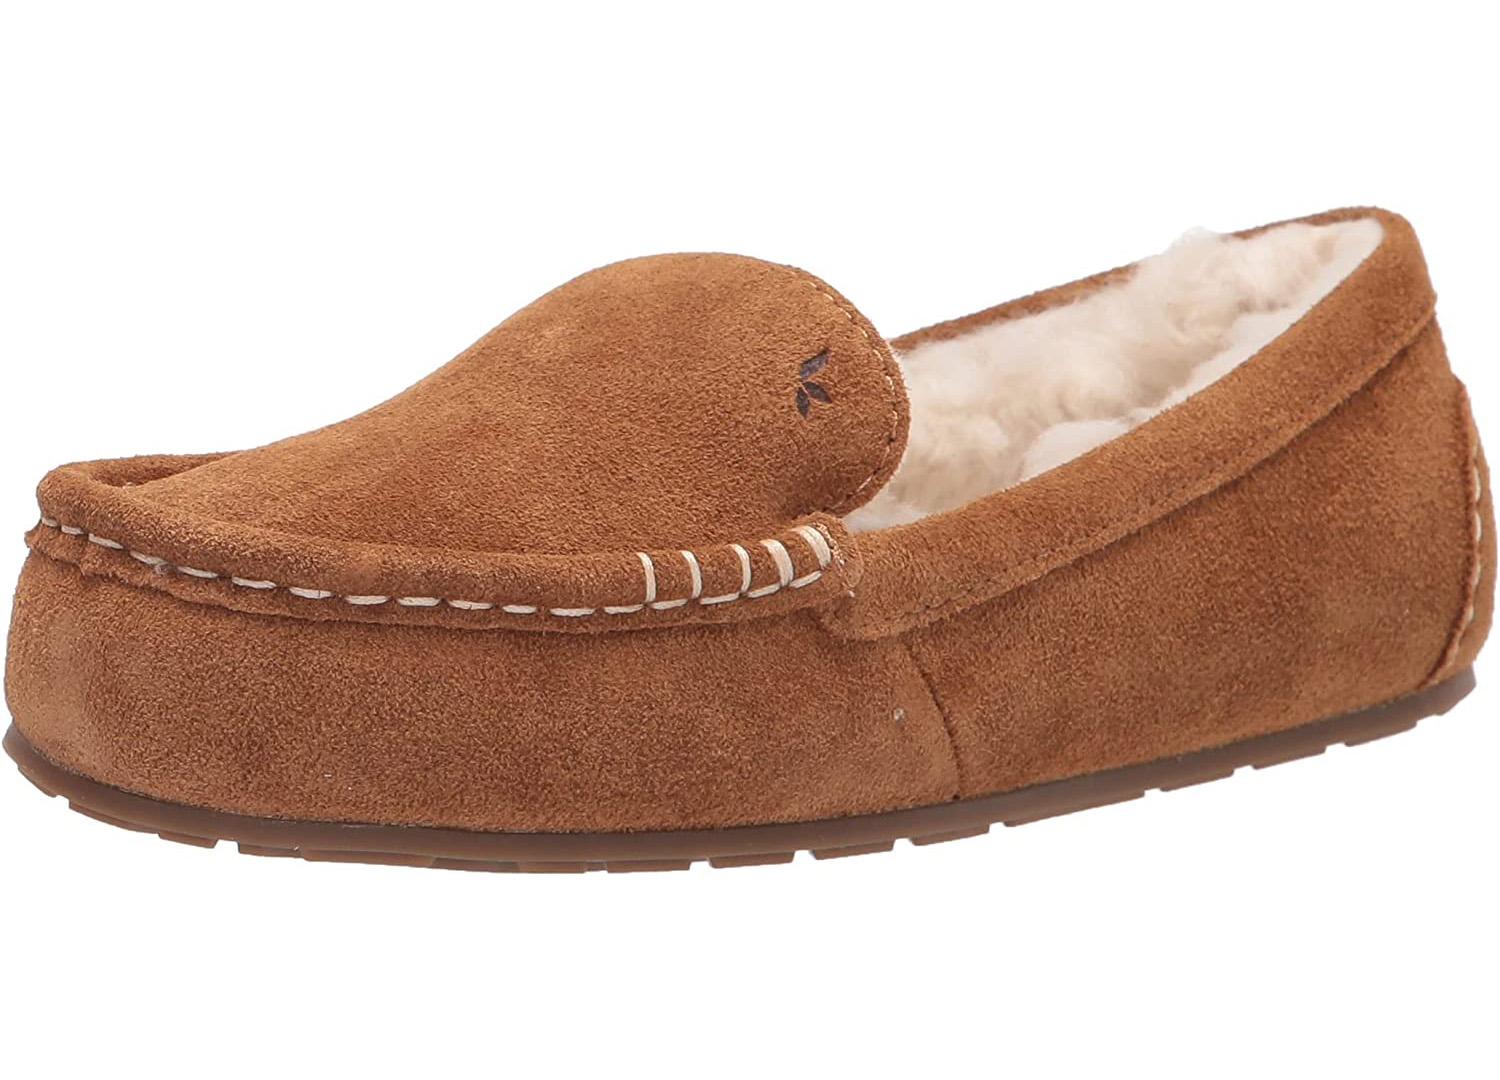 Koolaburra by UGG Womens Lezly Slipper Shoes for $22.73